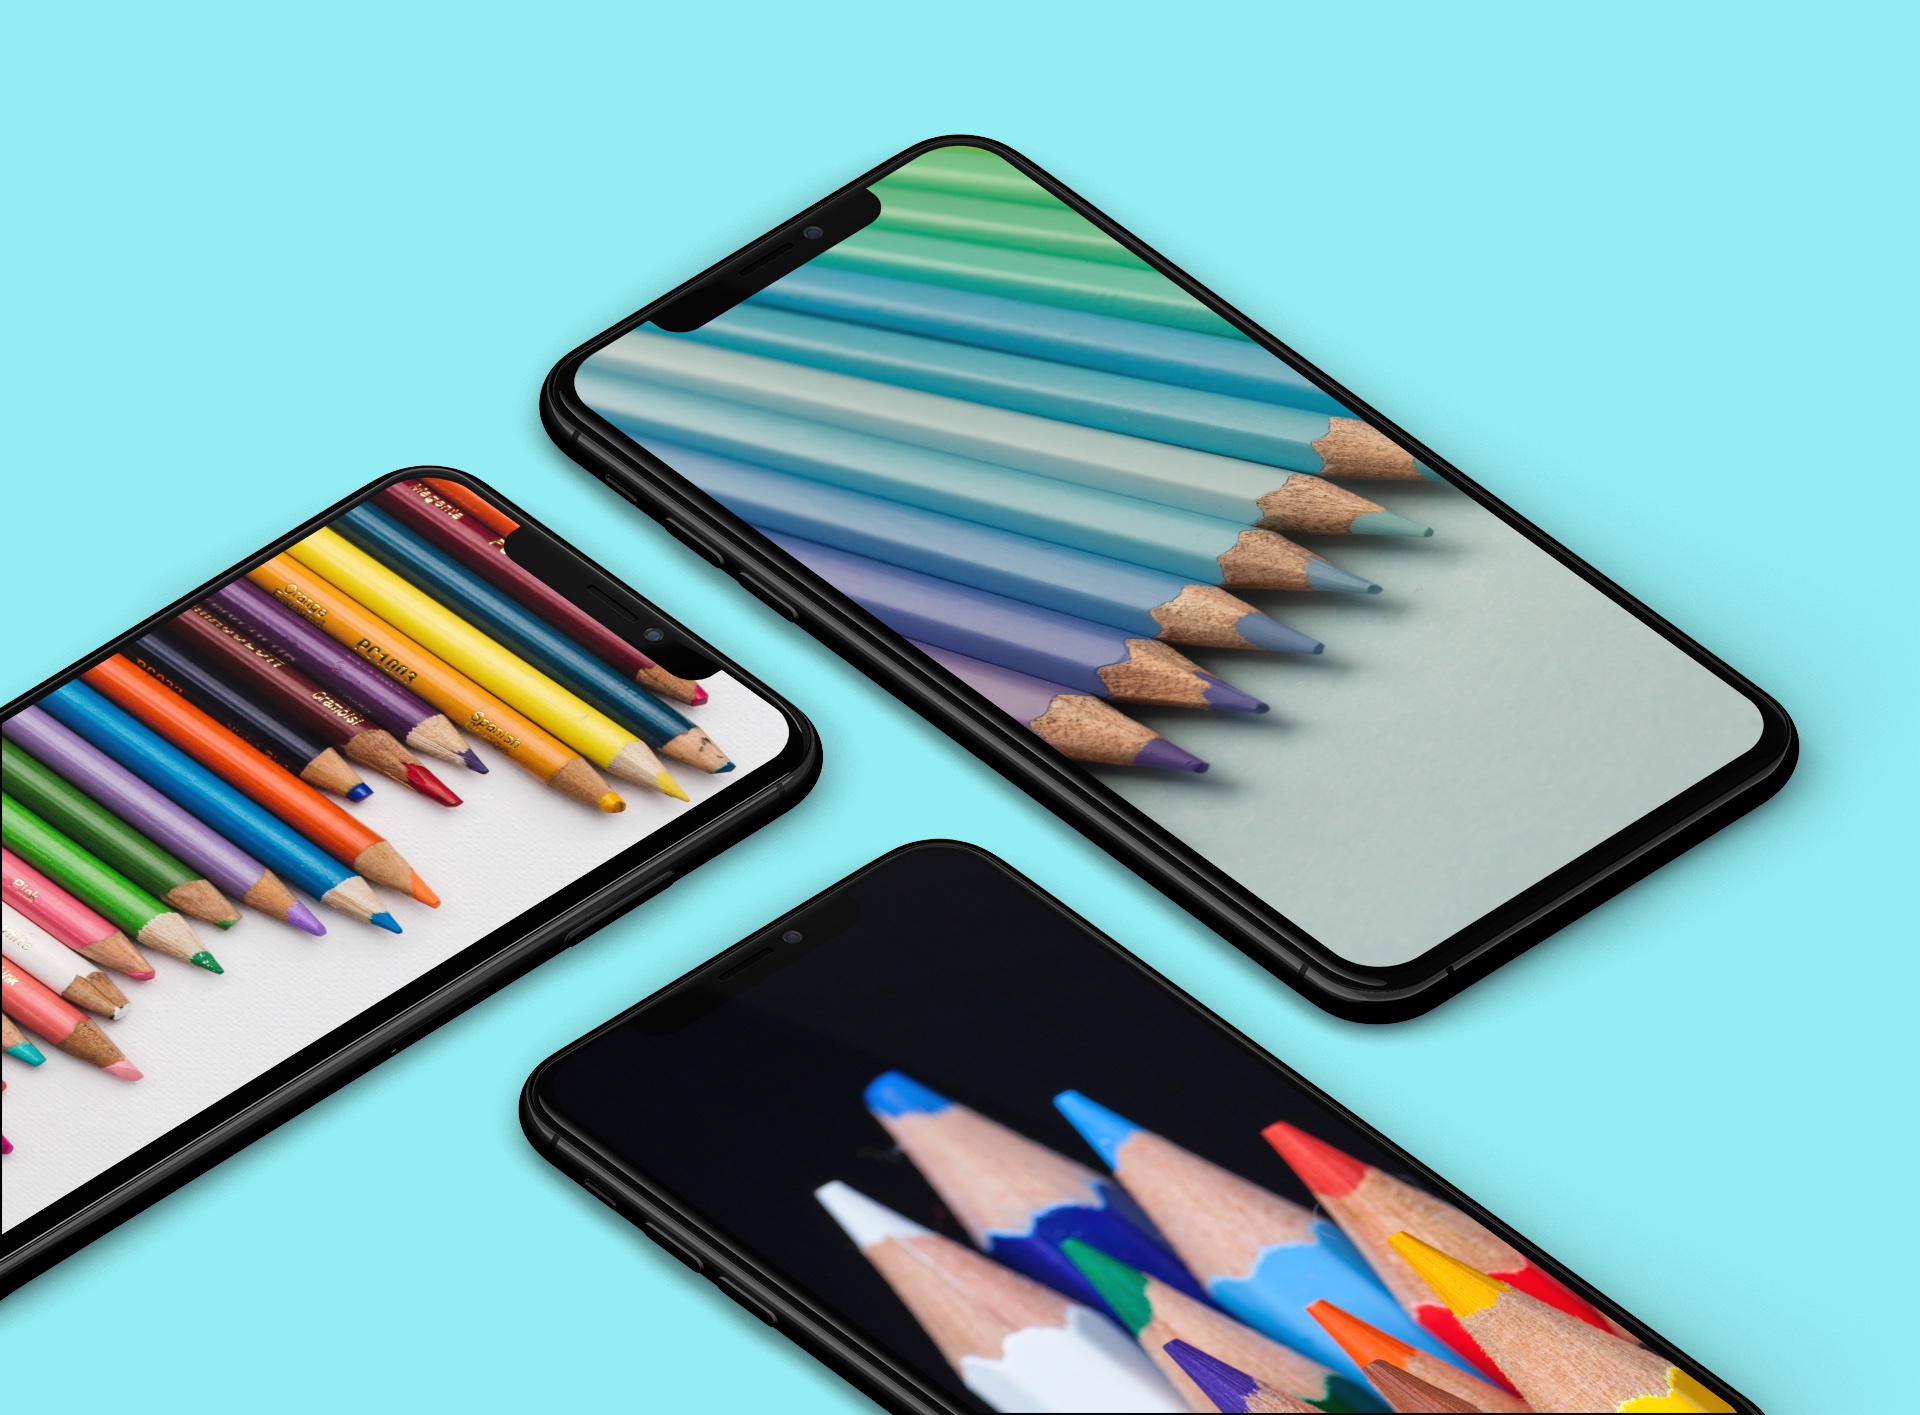 Pencil Wallpapers